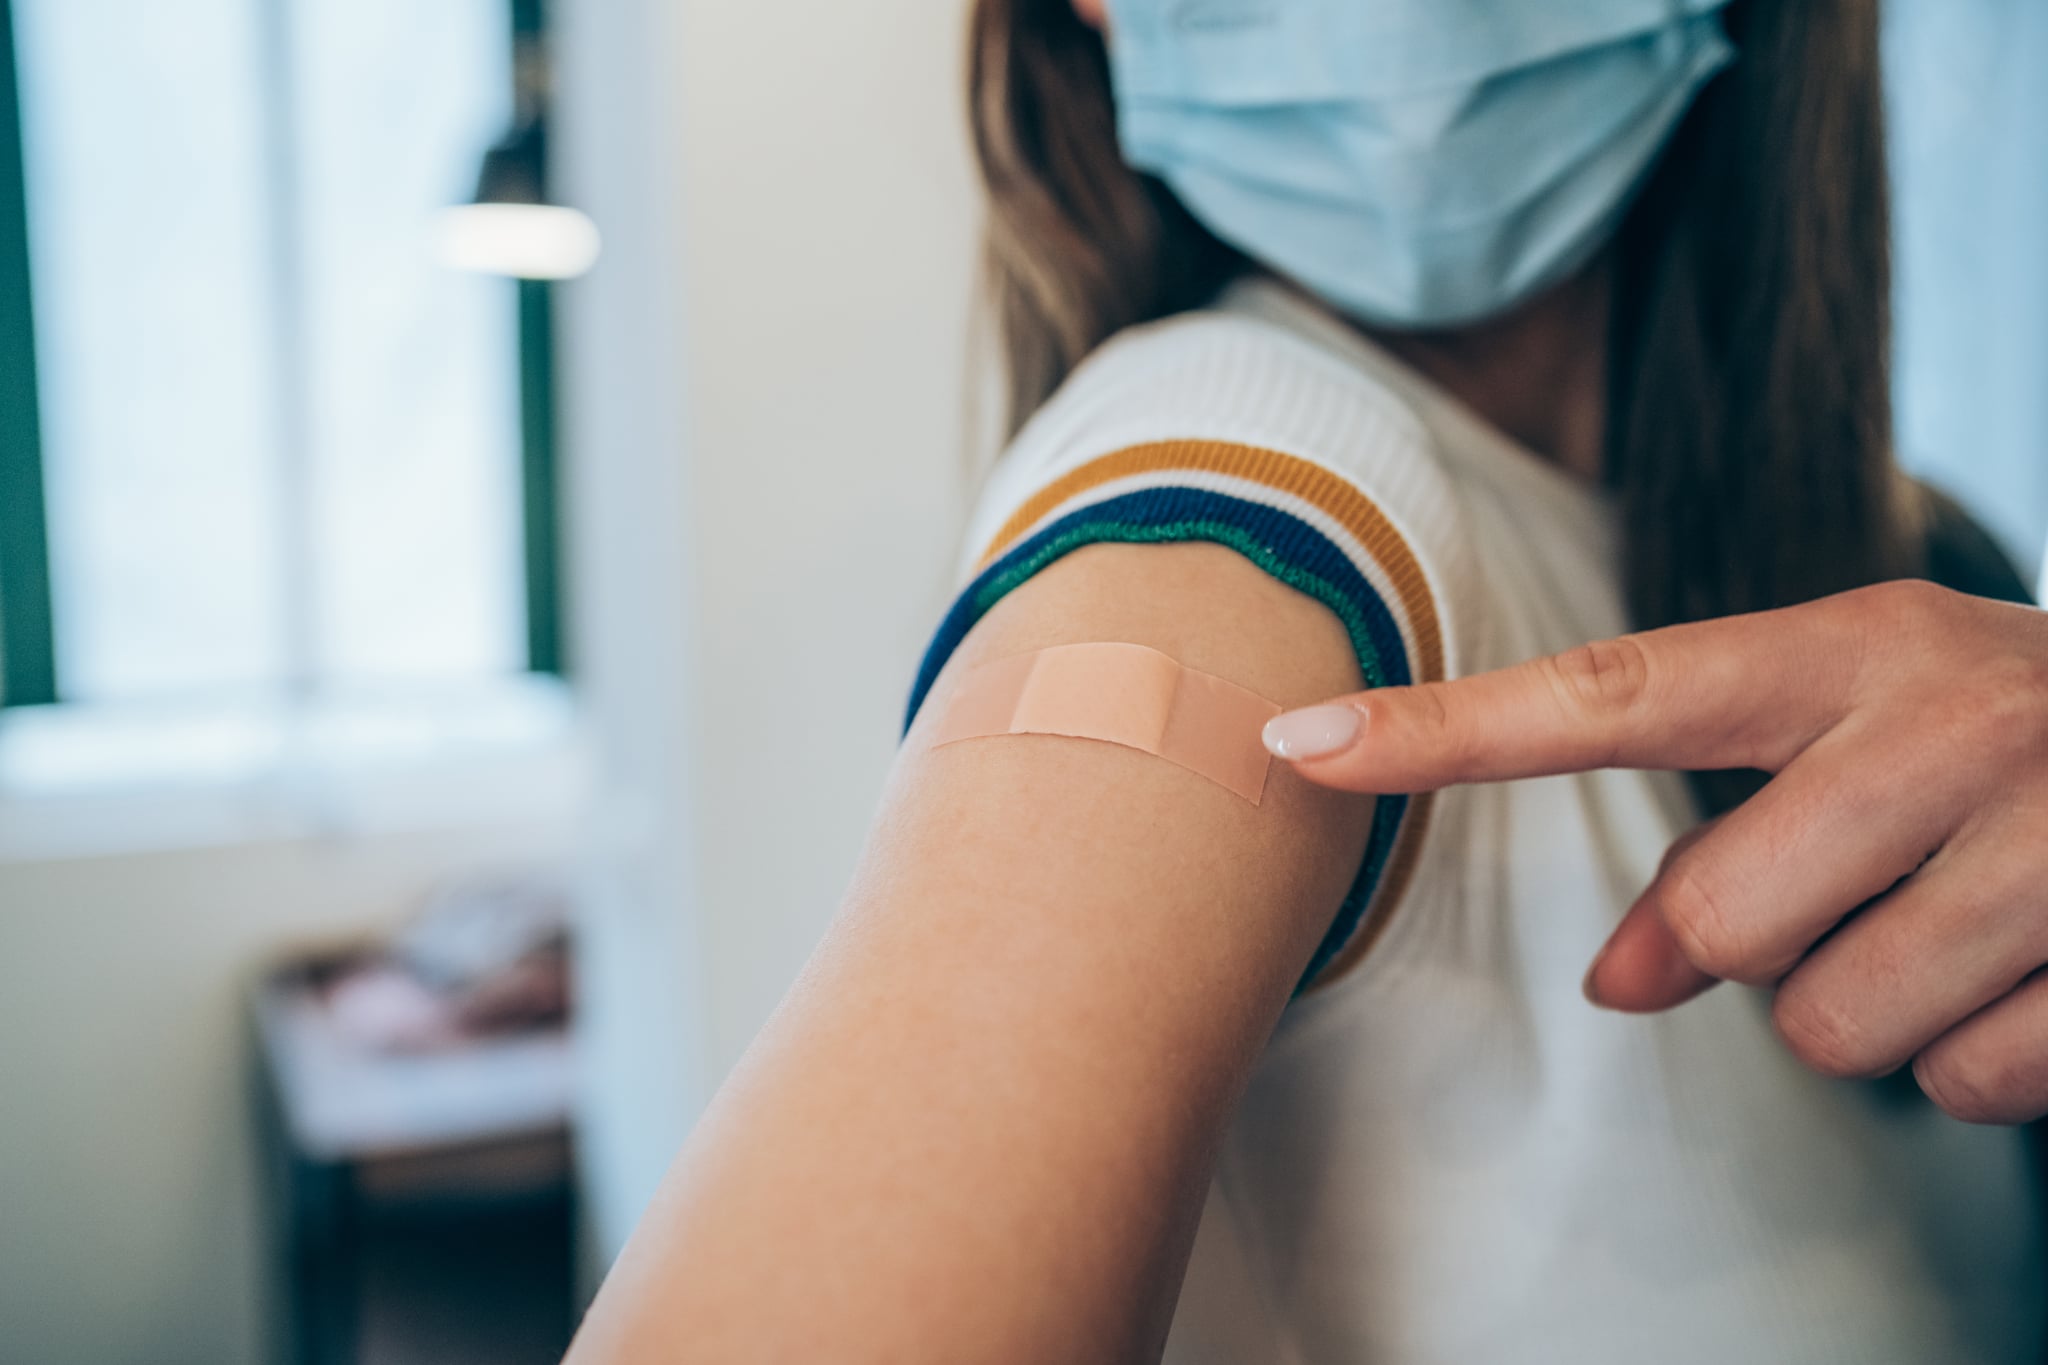 Woman wearing protective face mask and pointing at her arm with a bandage after receiving COVID-19 vaccine. Young woman showing her shoulder after getting coronavirus vaccine at vaccination center.